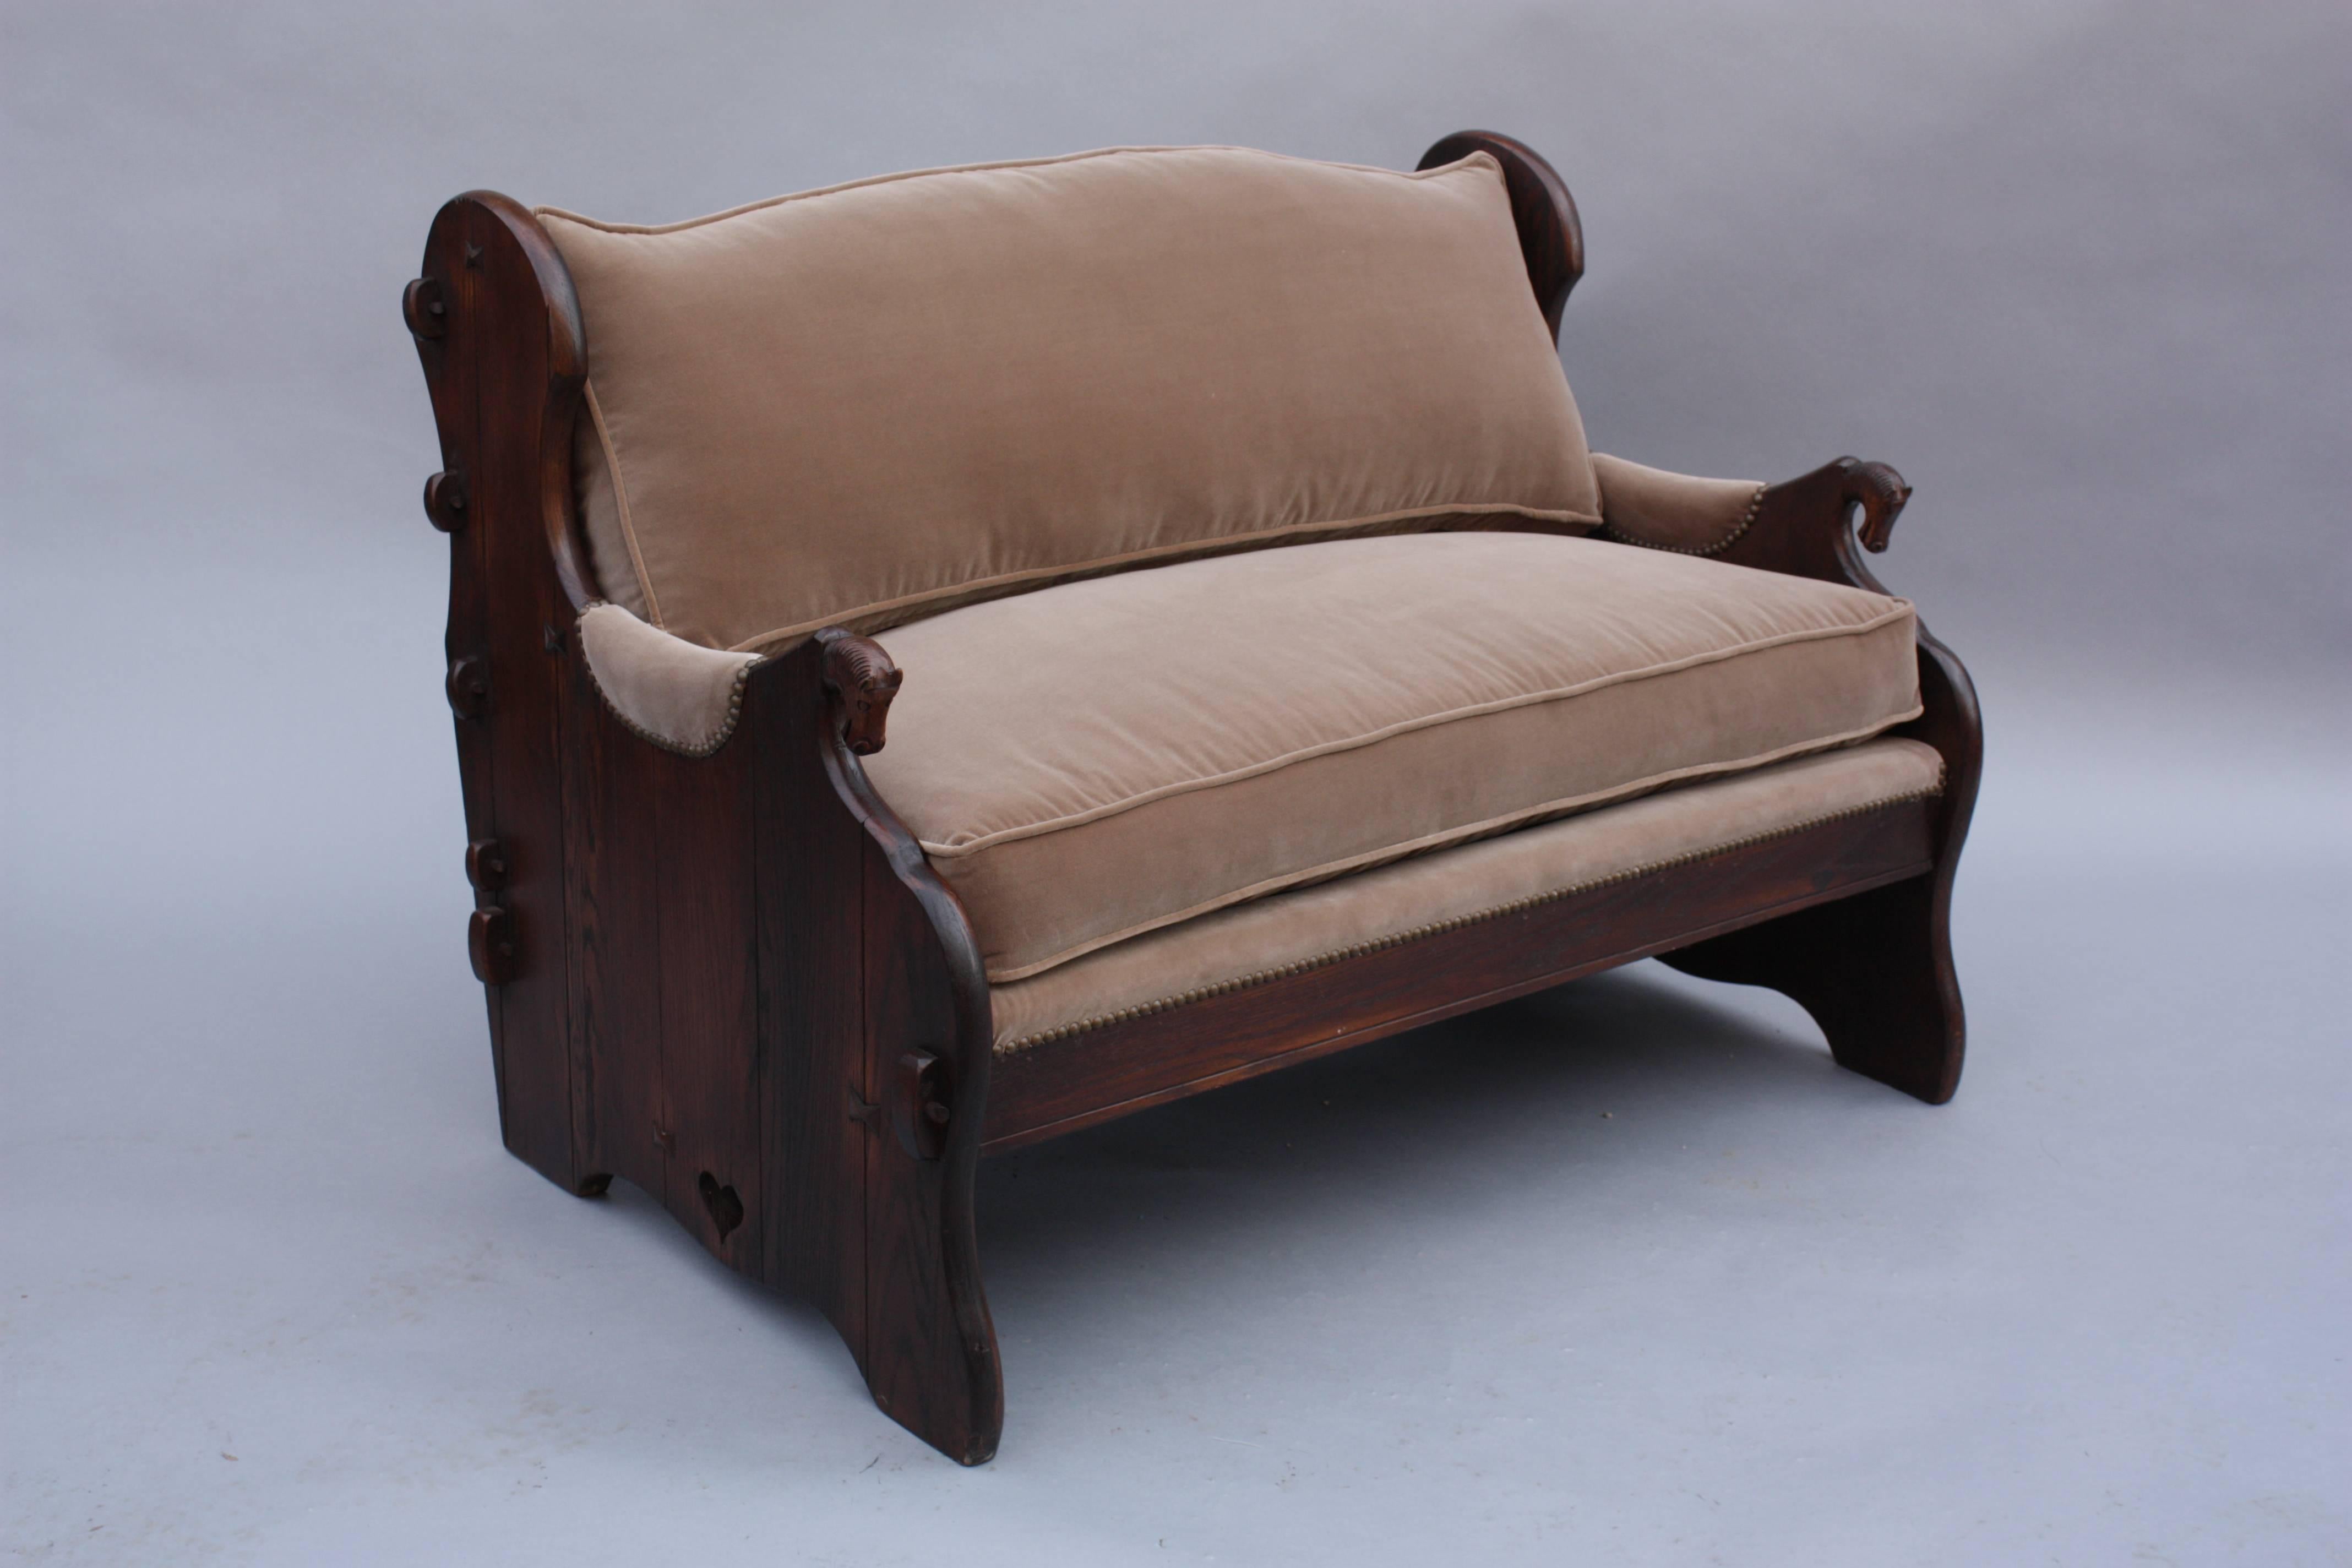 Early 20th Century 1920s Small Spanish Revival Sofa Love Seat with Horse Motif